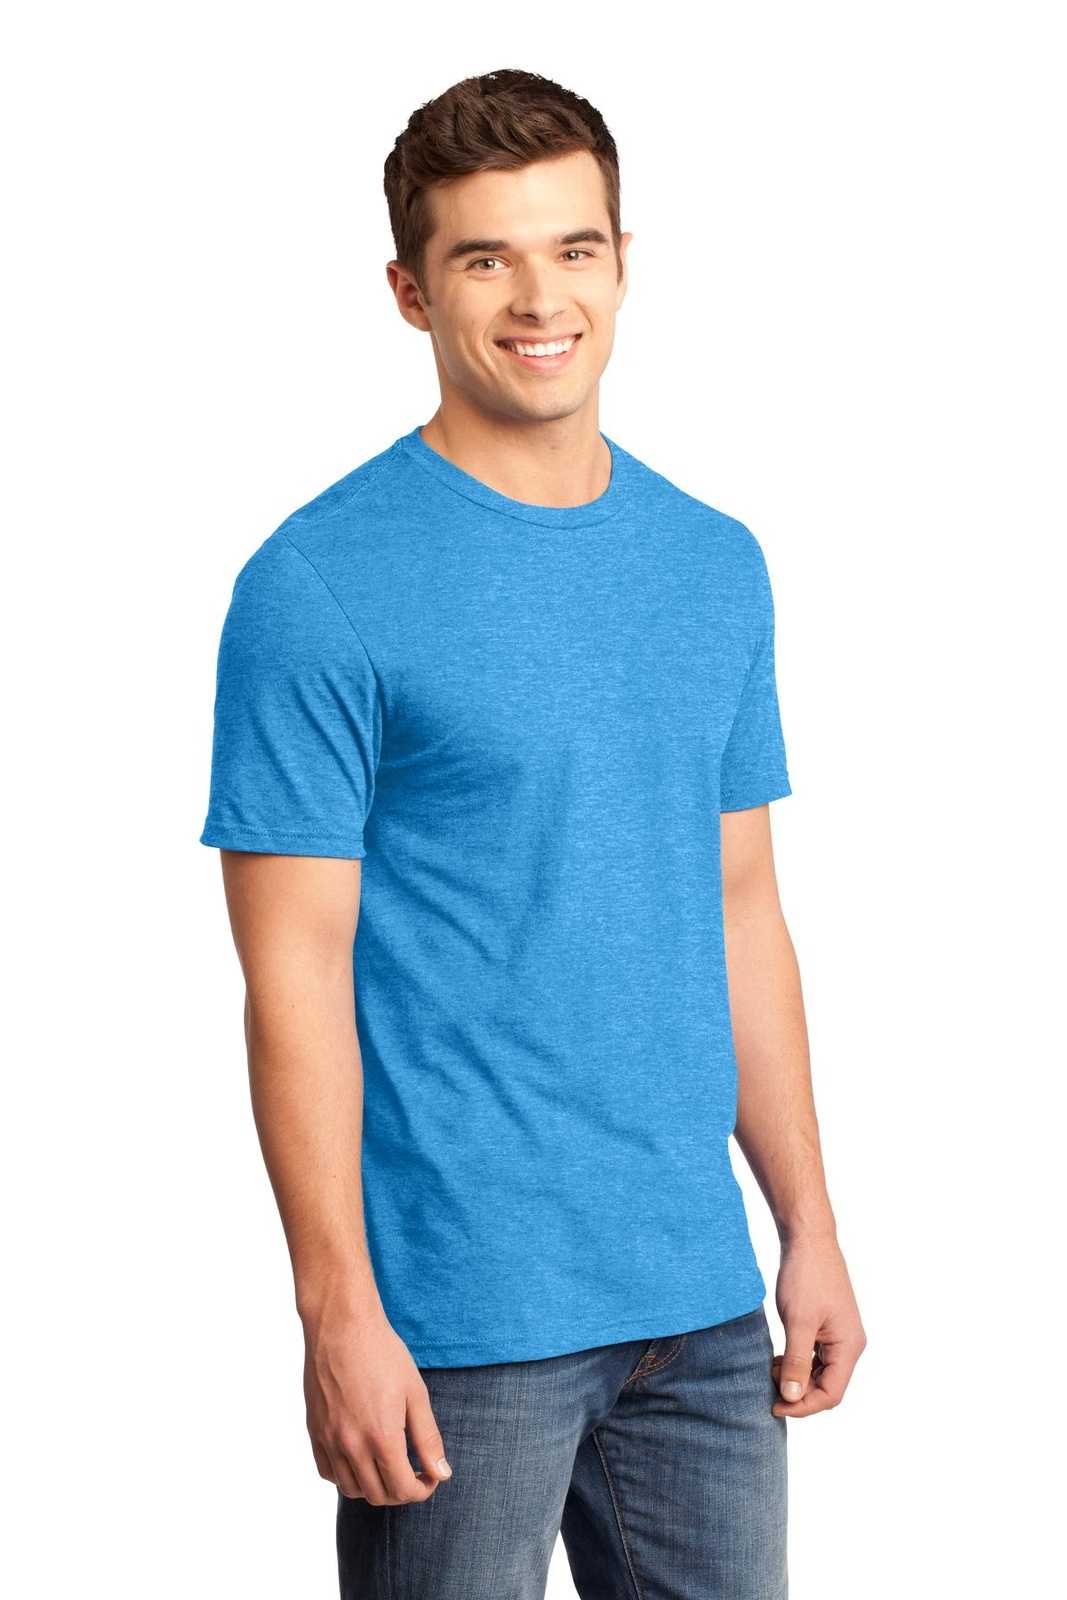 District DT6000 Very Important Tee - Heathered Bright Turquoise - HIT a Double - 4